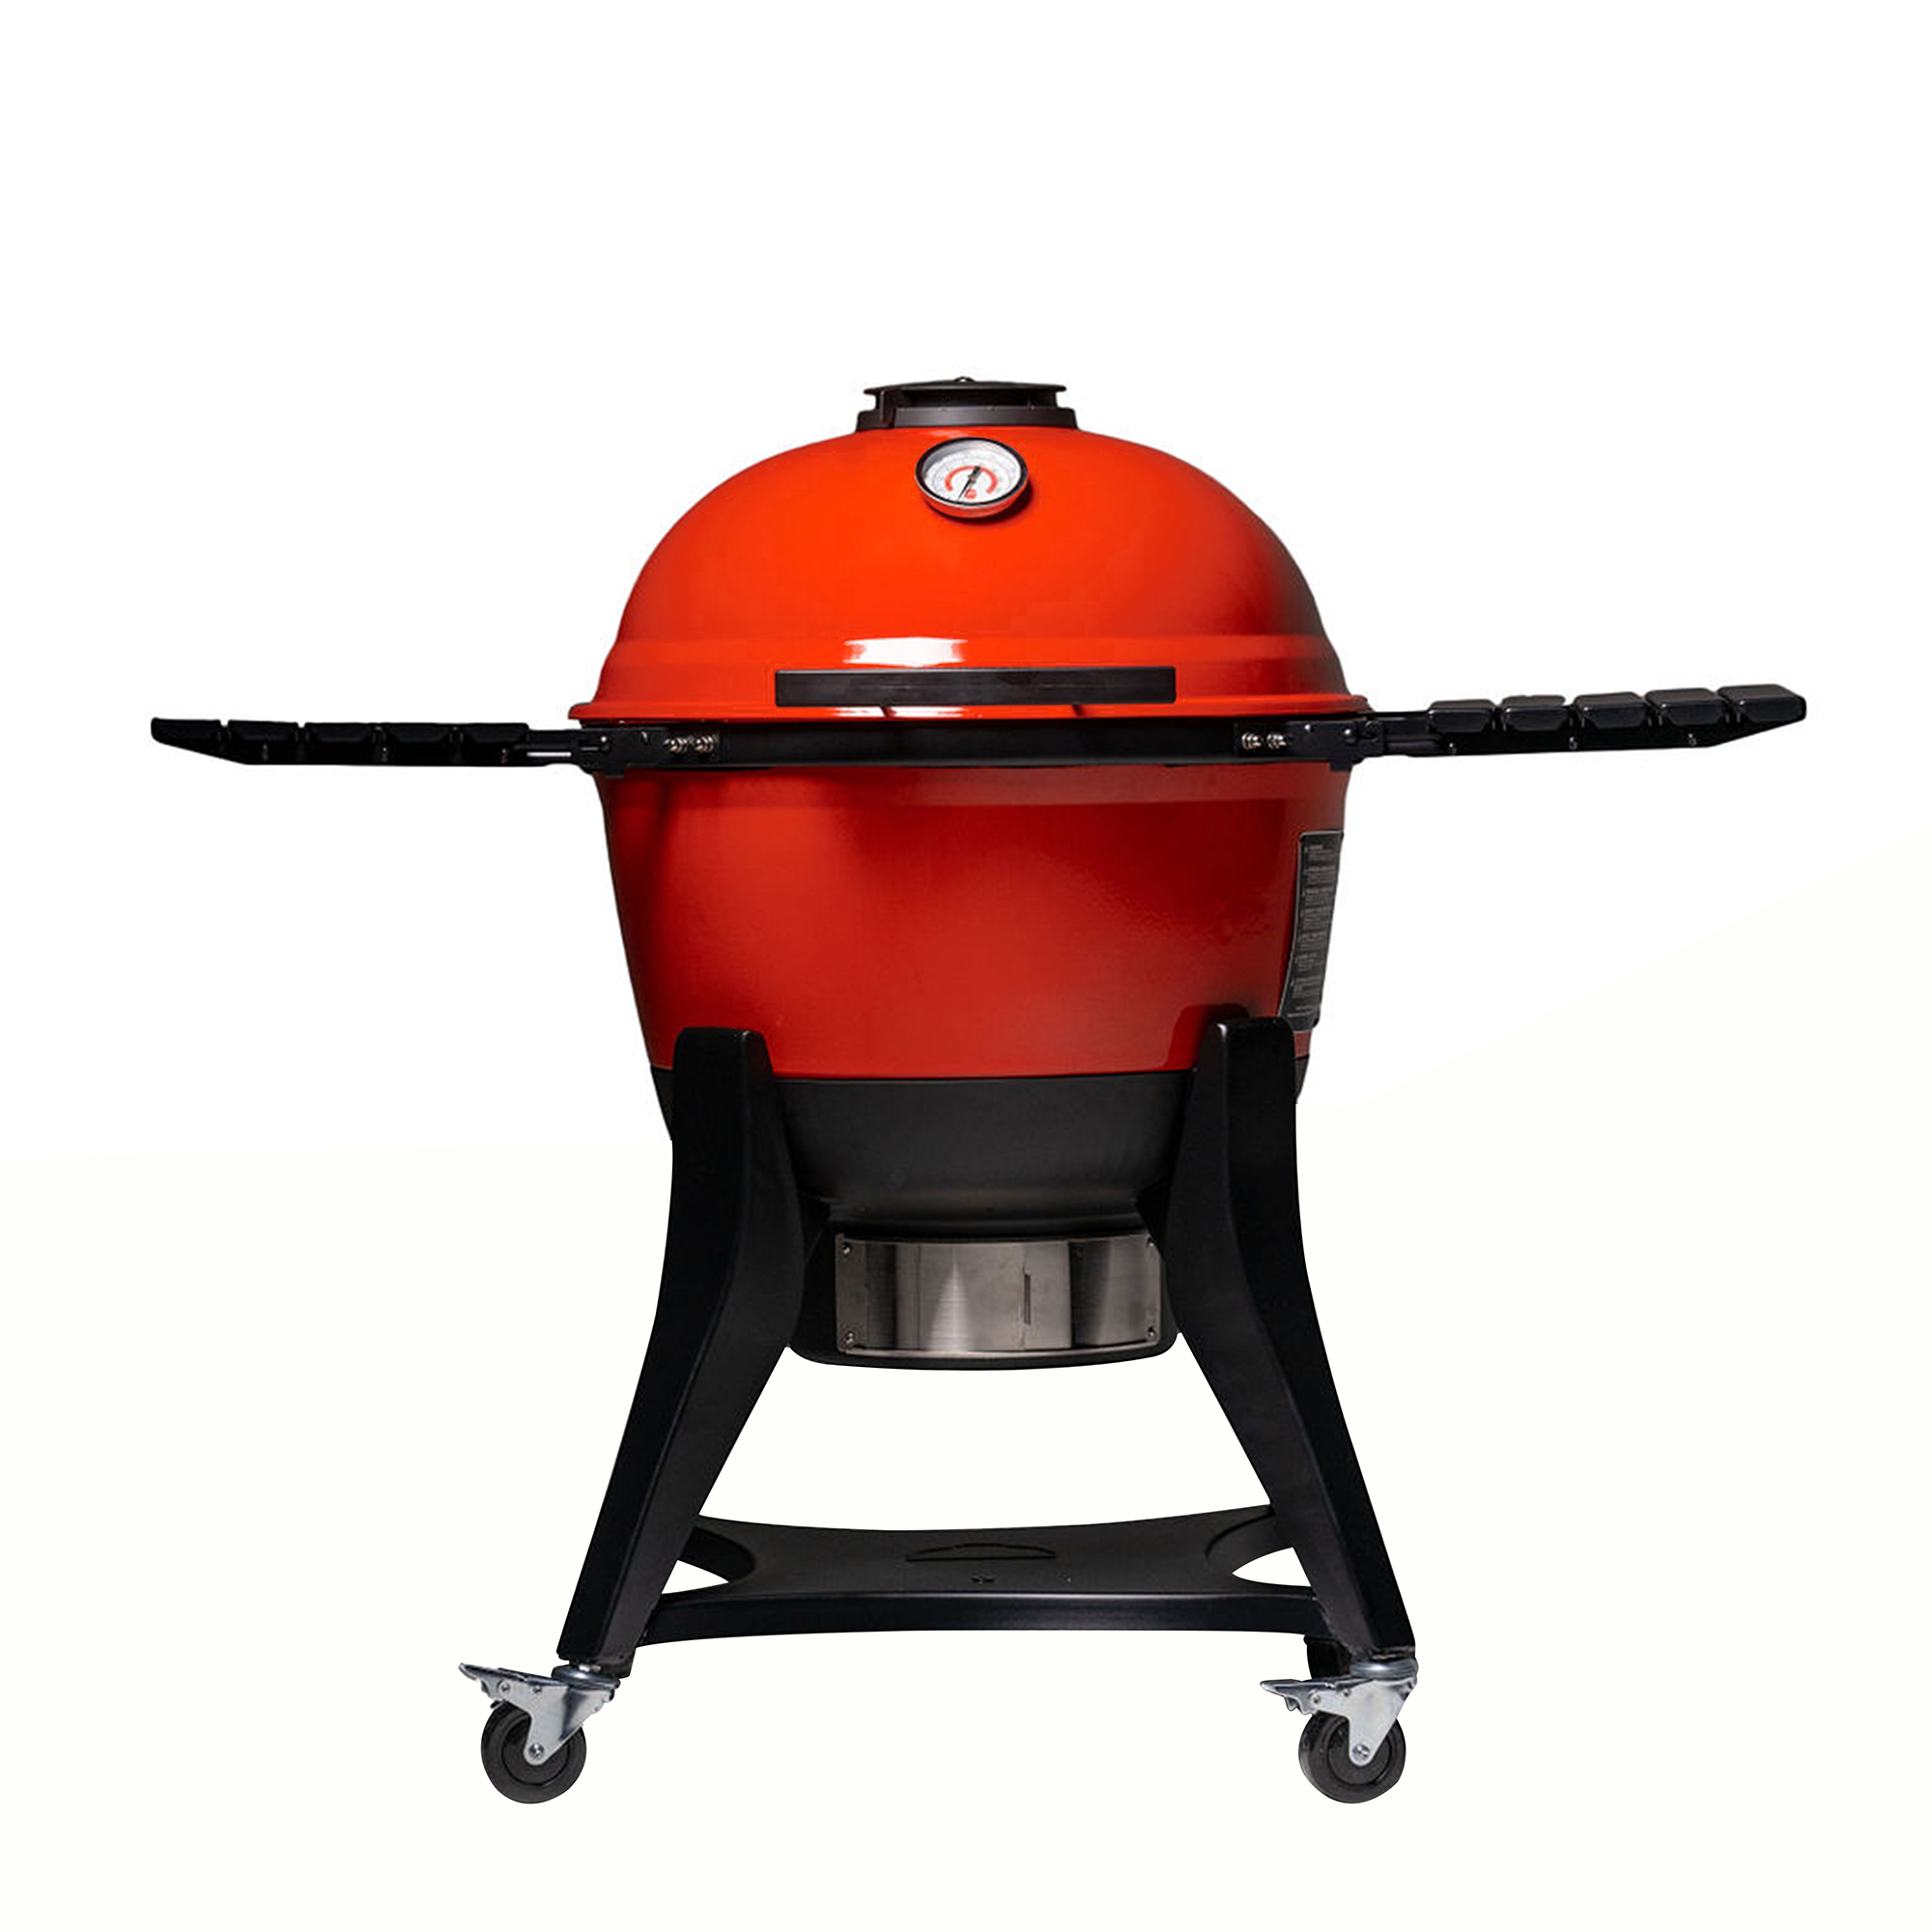 Kamado Joe Kettle Joe 22 in. Charcoal Grill in Red with Hinged Lid, Cart, and Side Shelves - image 3 of 12